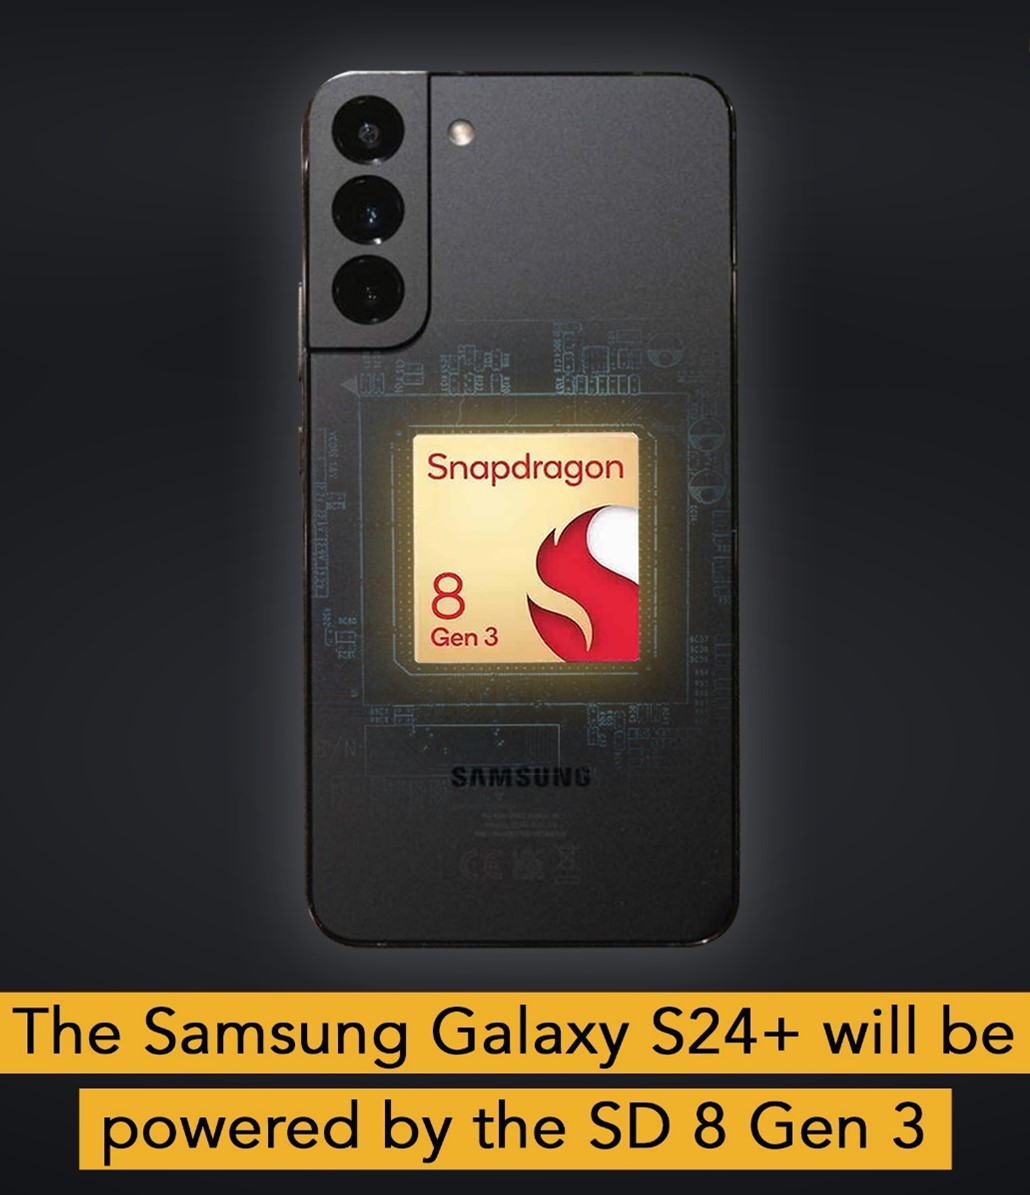 samsung s24 series will probably implement snapdragon 8 gen 3